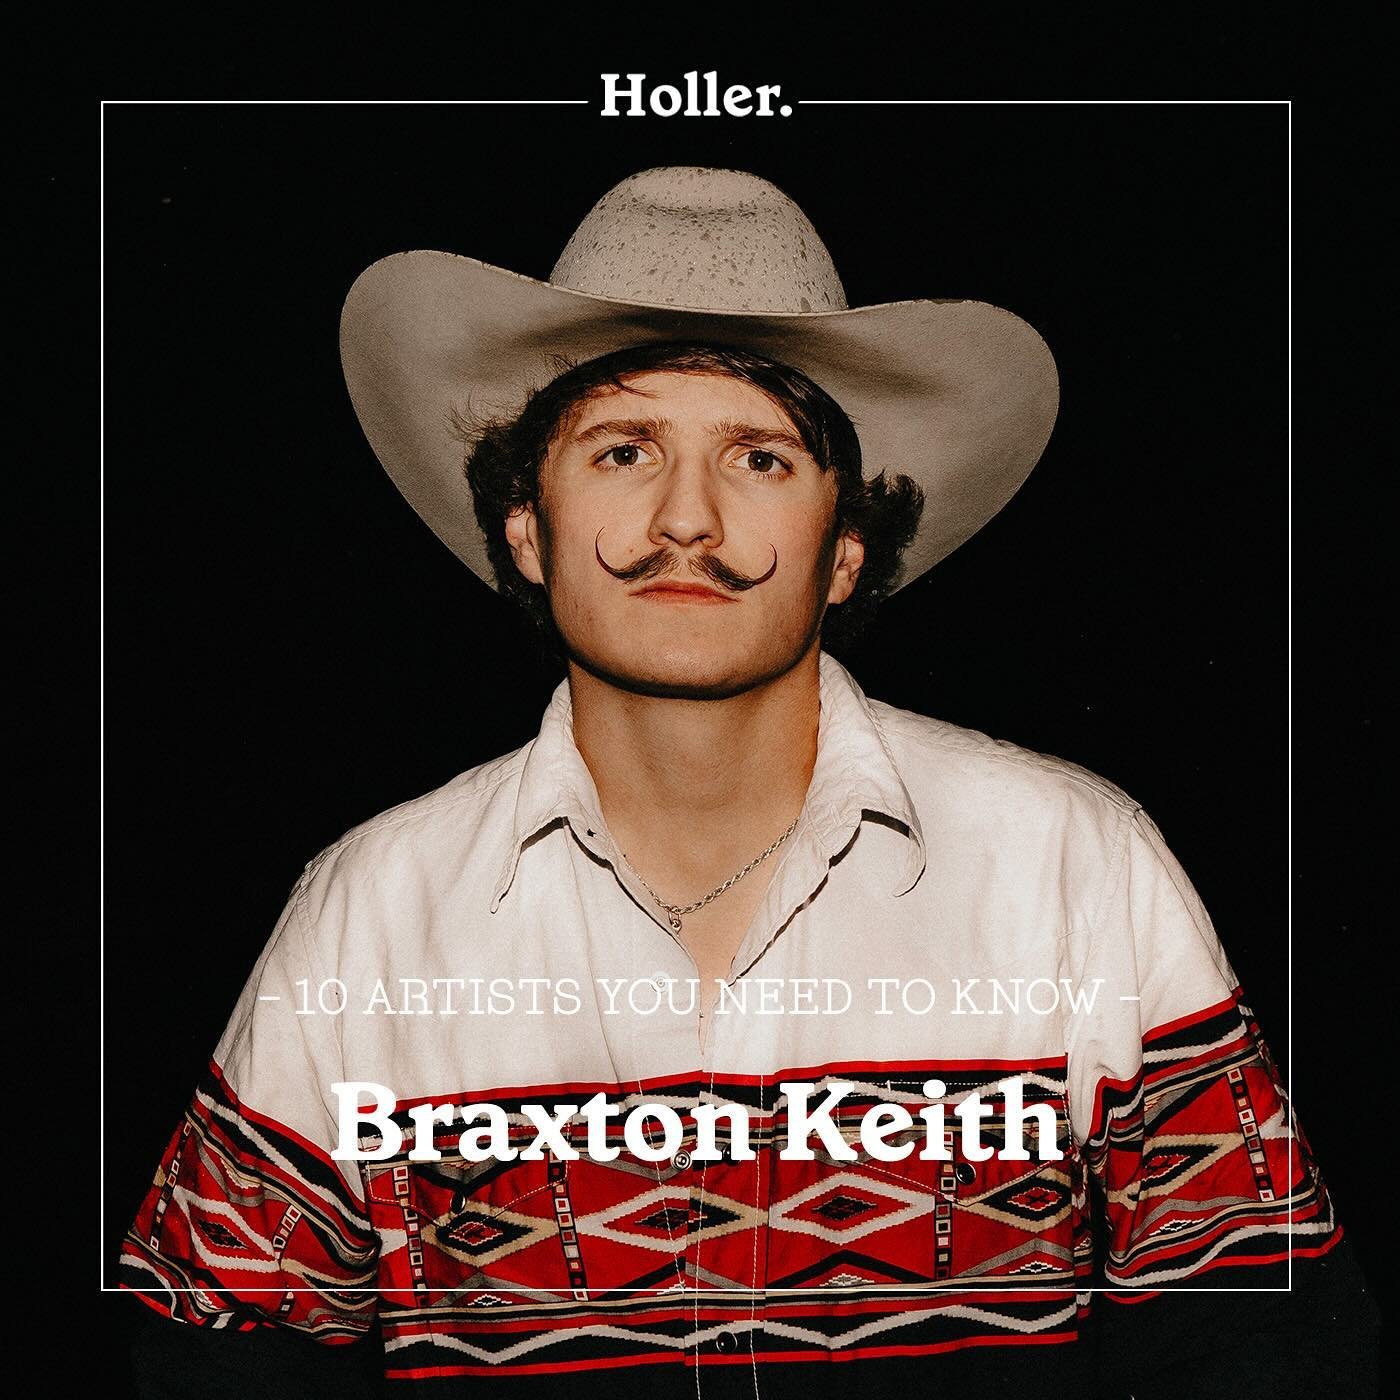 Thanks @hollercountry for including @braxton.keith to this months 10 Artist You Need to Know feature!